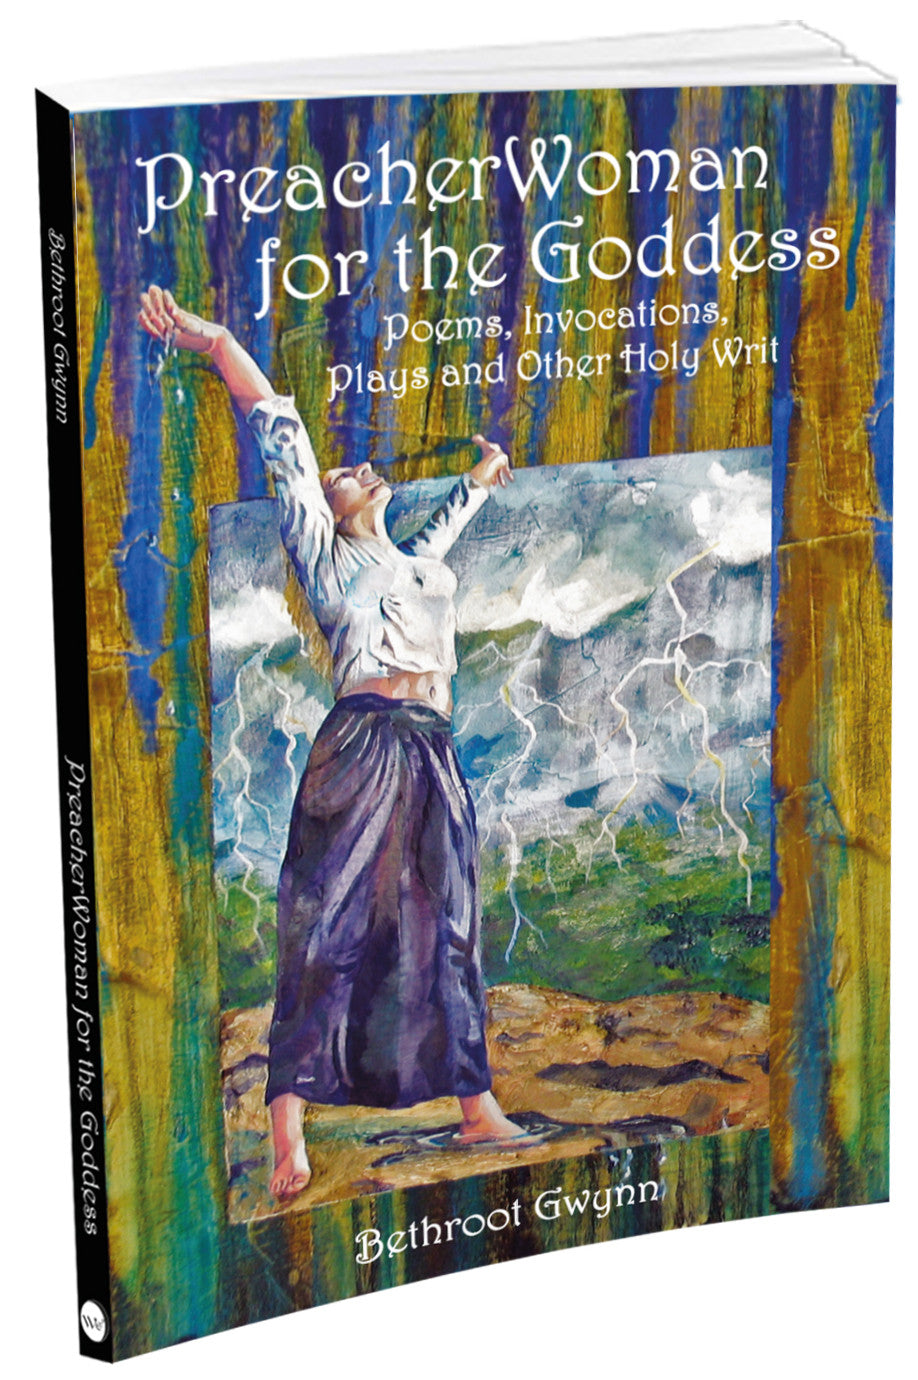 PreacherWoman for the Goddess:  Poems, Invocations, Plays and Other Holy Writ 120 pages with 7 full color art features, 6x9, softbound. ISBN: 978-1-942775-12-6 $16